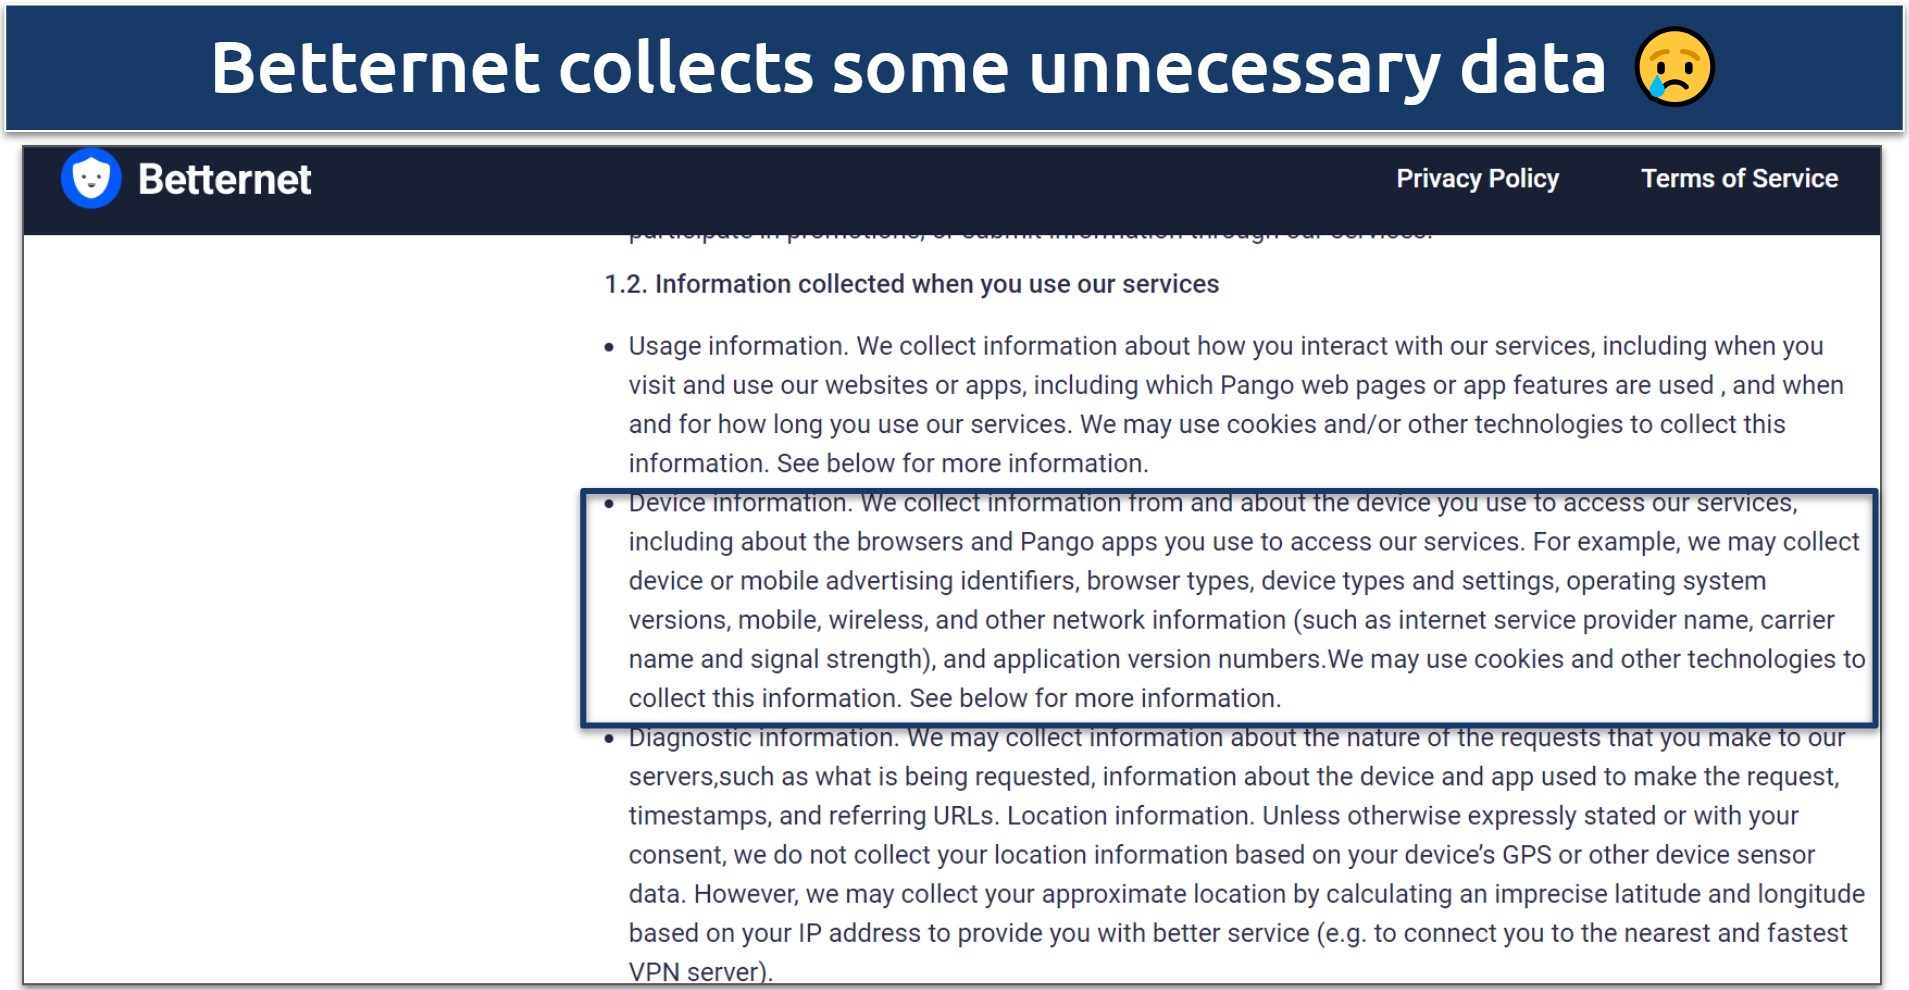 Screenshot of Betternet's privacy policy showing the data it collects